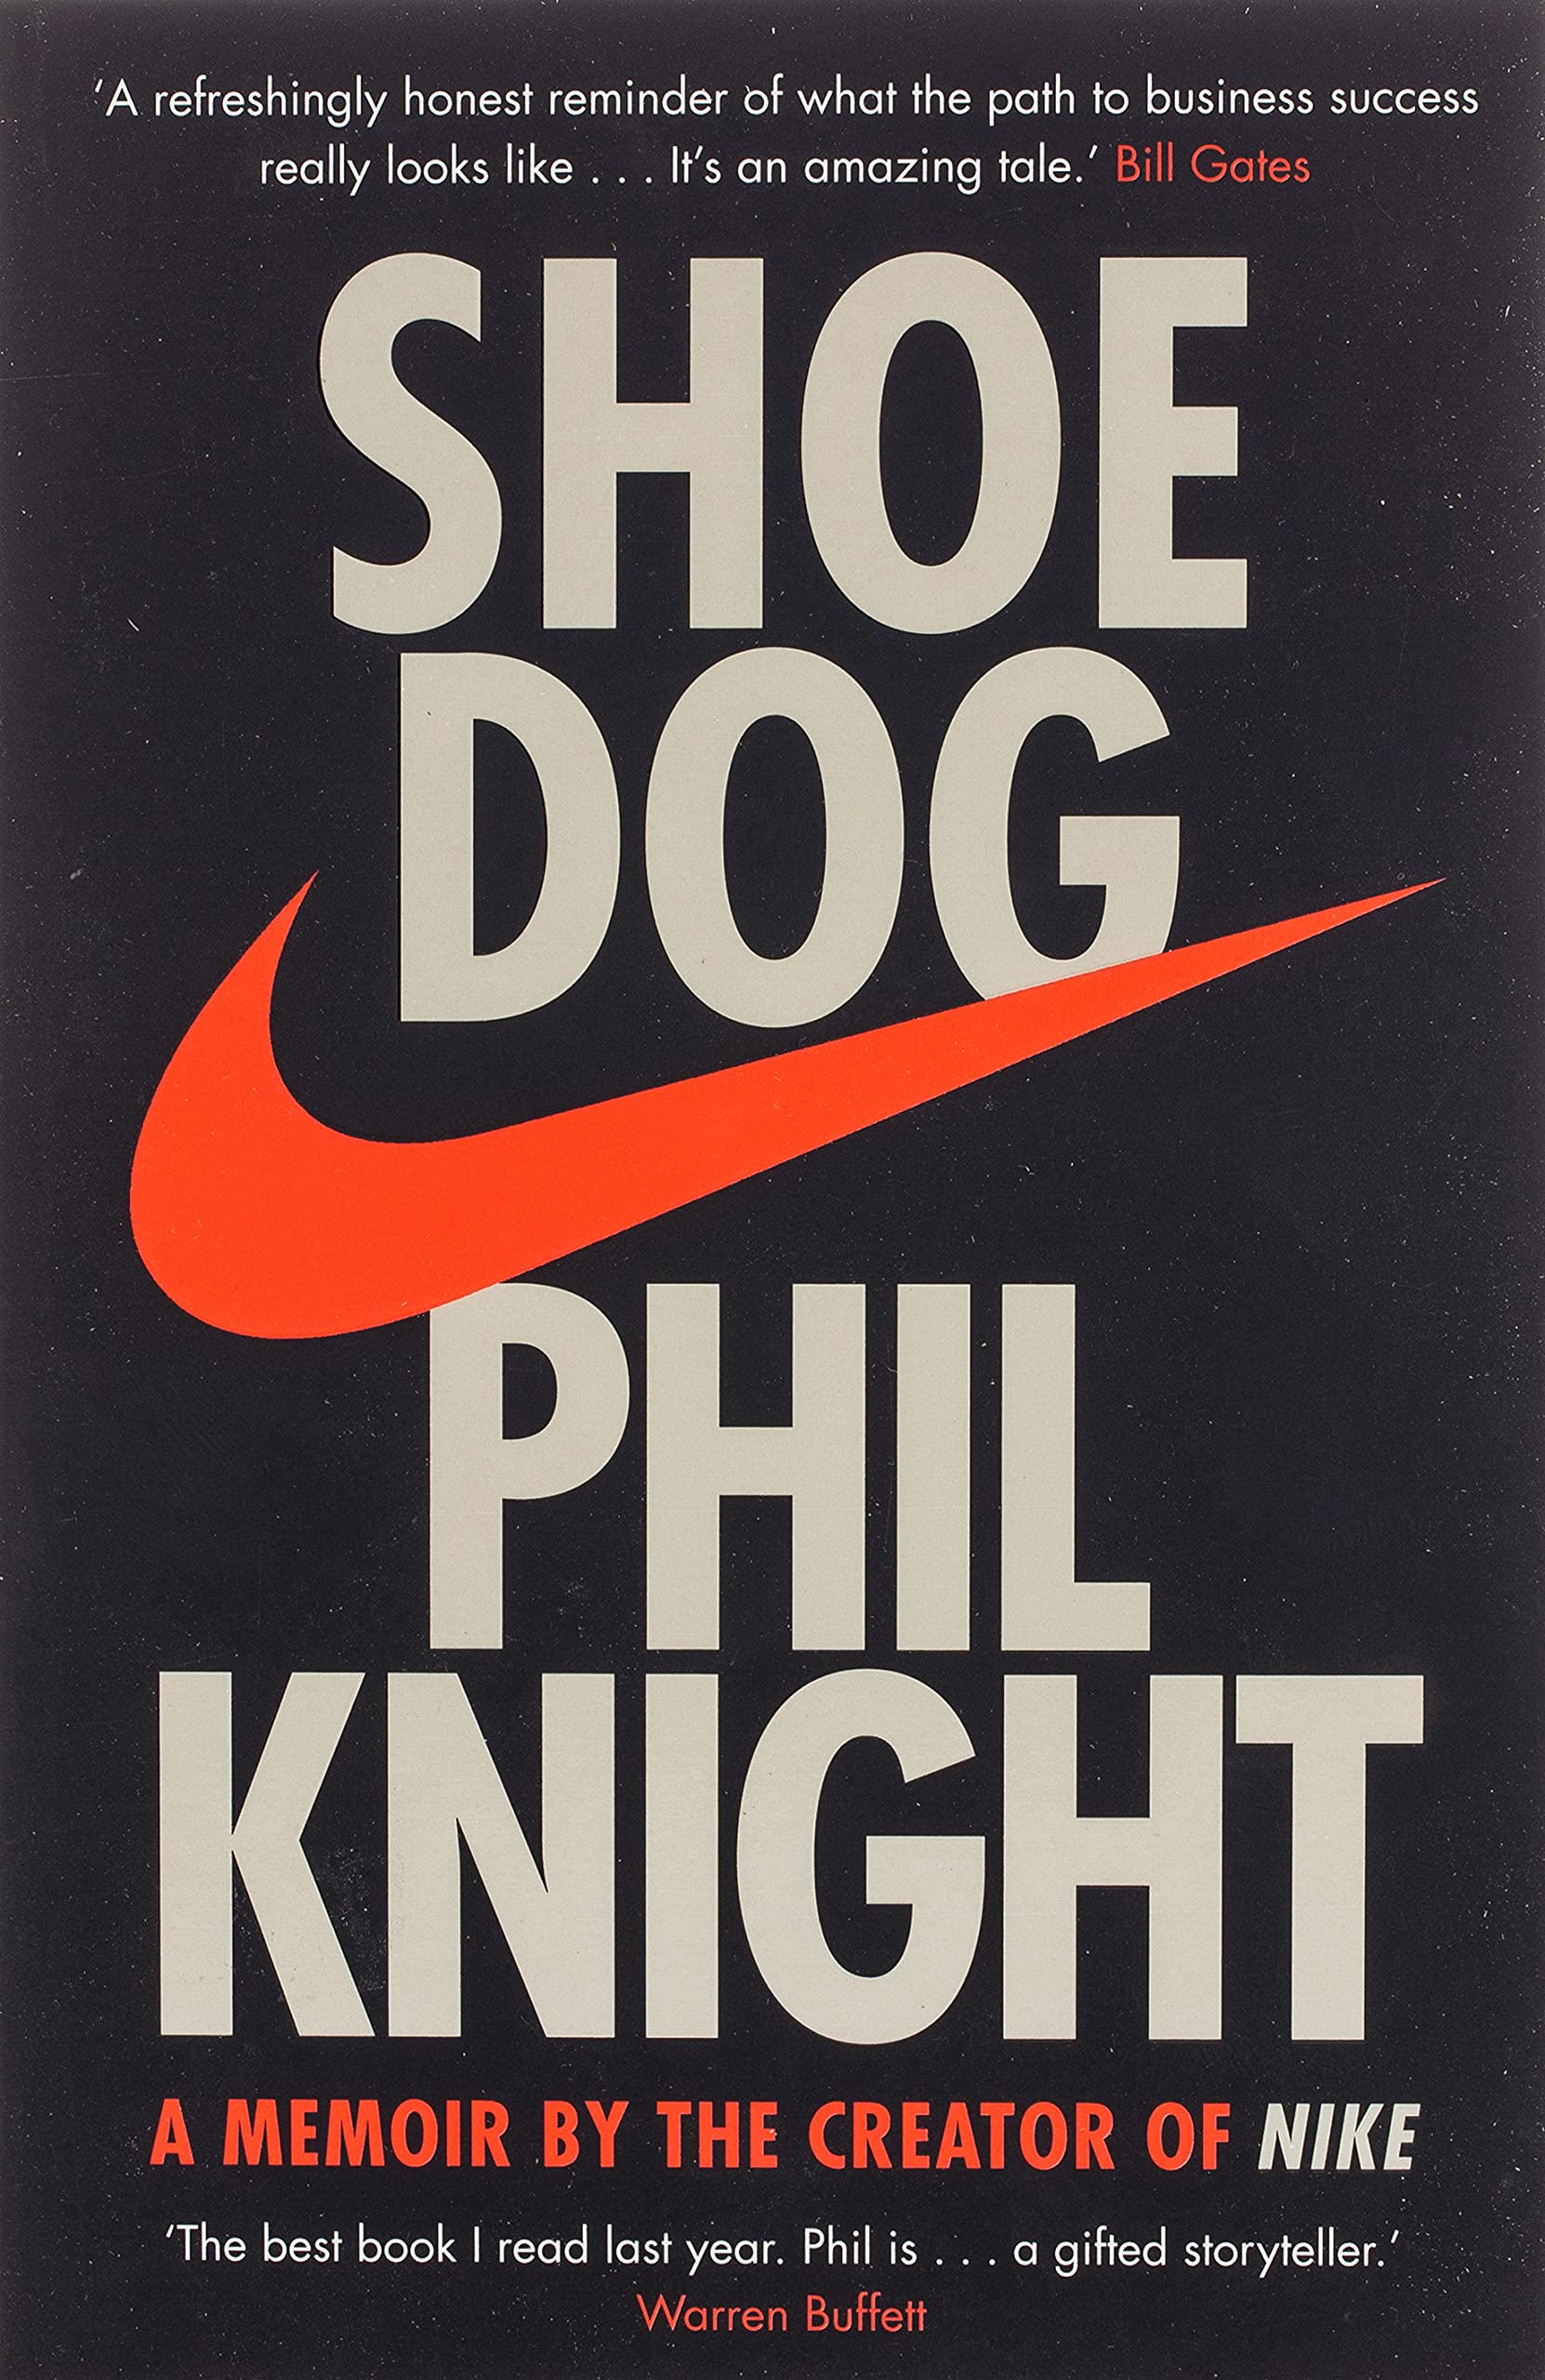 Shoe Dog: A by the Creator of NIKE by Phil Knight | Bookpasskar